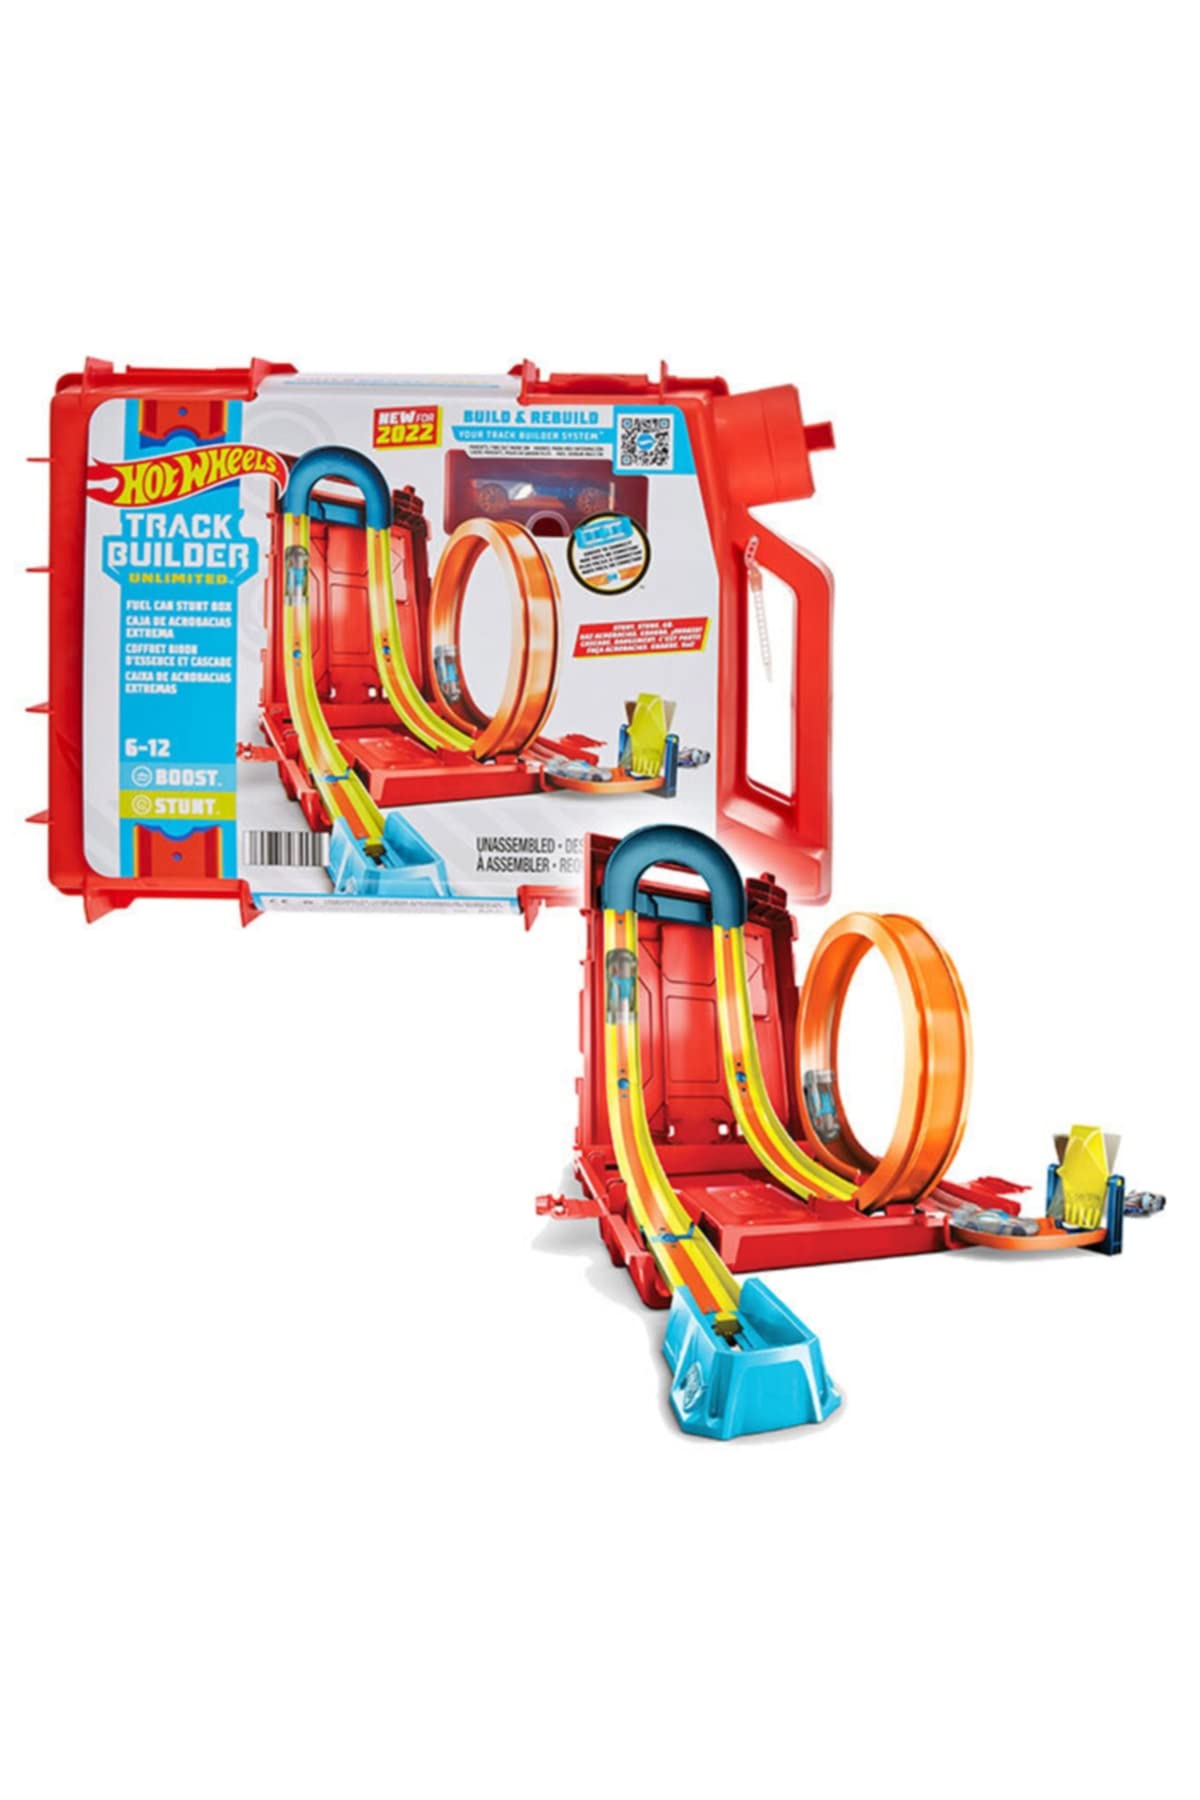 Hot Wheels Track Builder Unlimited Playset